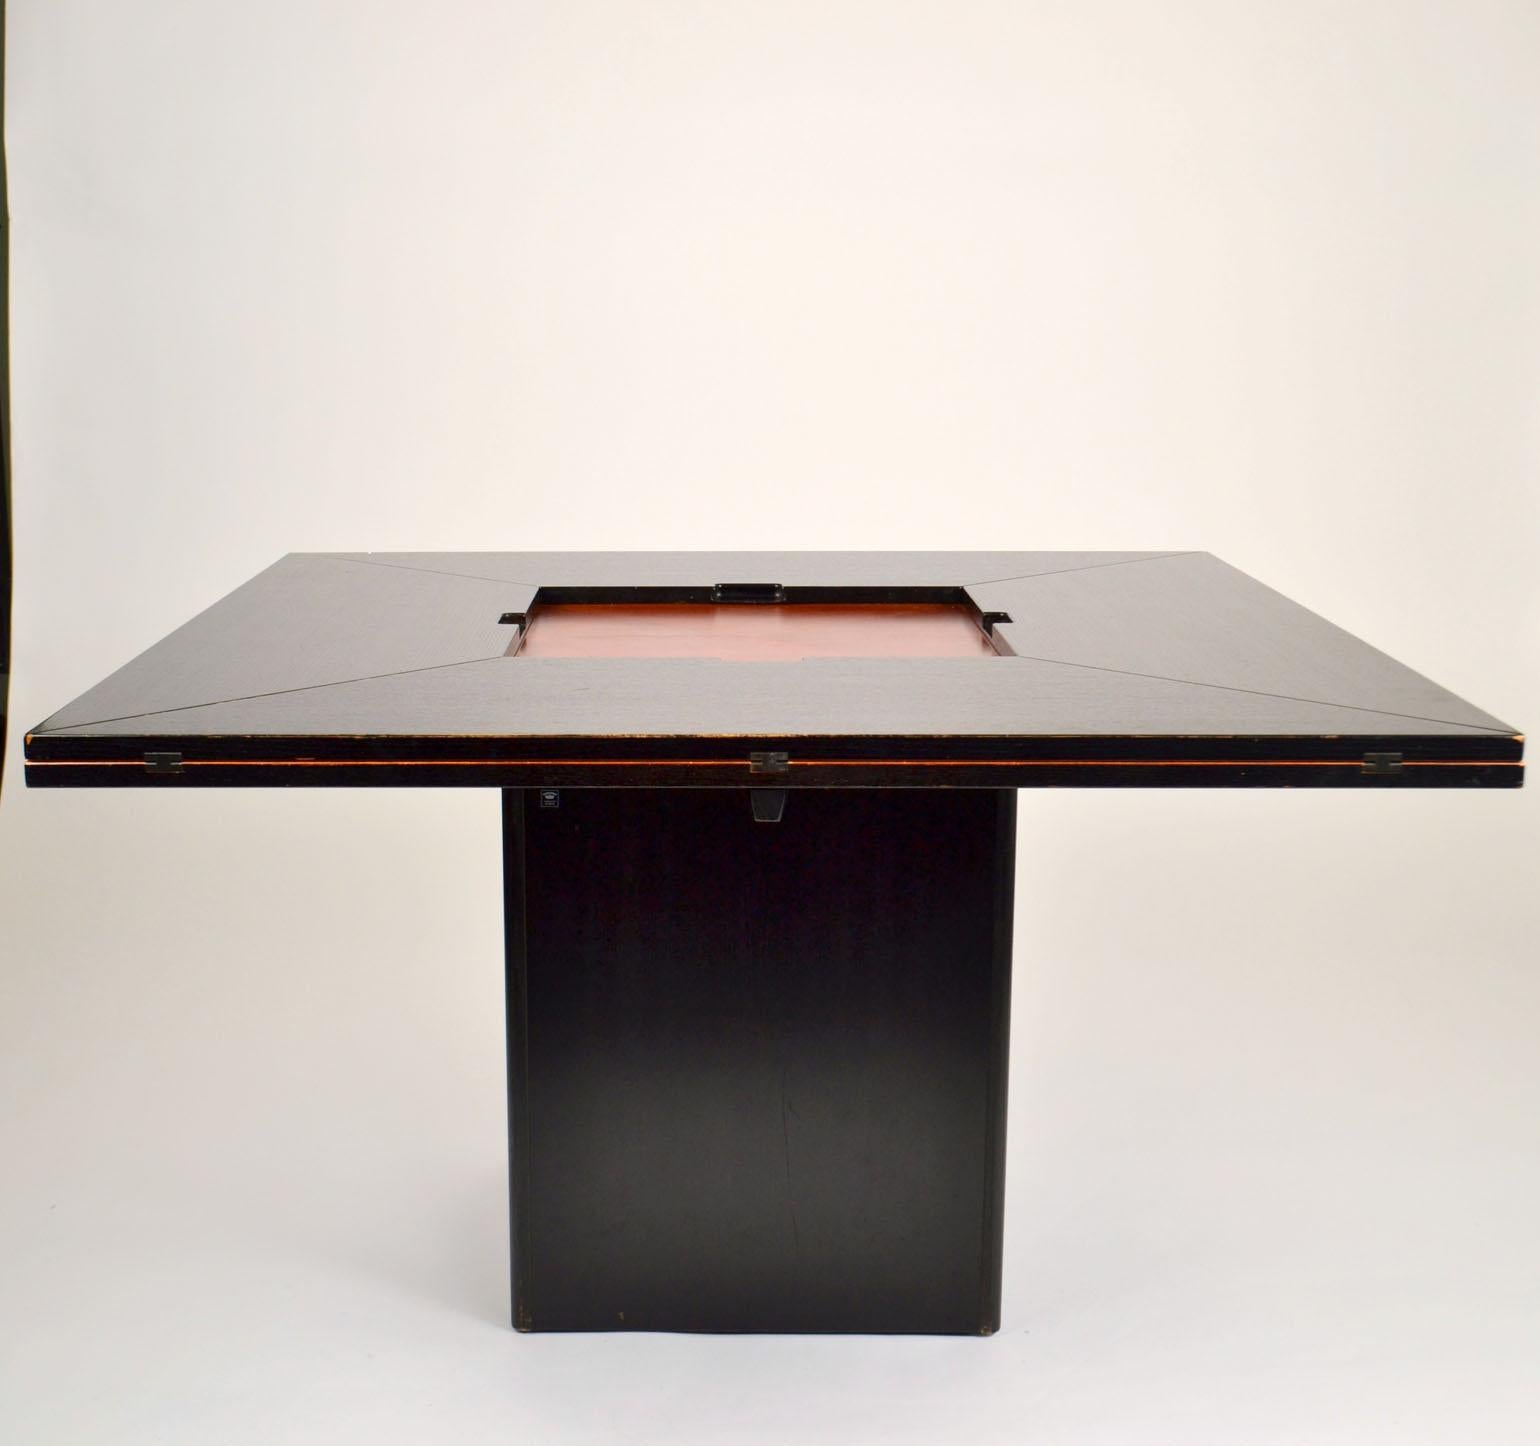 Extendable Cirkante dining table by Pauvers van den Berghe, Belgium and produced by Tranekaer Denmark. The table in compact for is black ebonised wood and measures 145 x 145 cm and seats 4-8 people. The center holds a square slate plate that can be